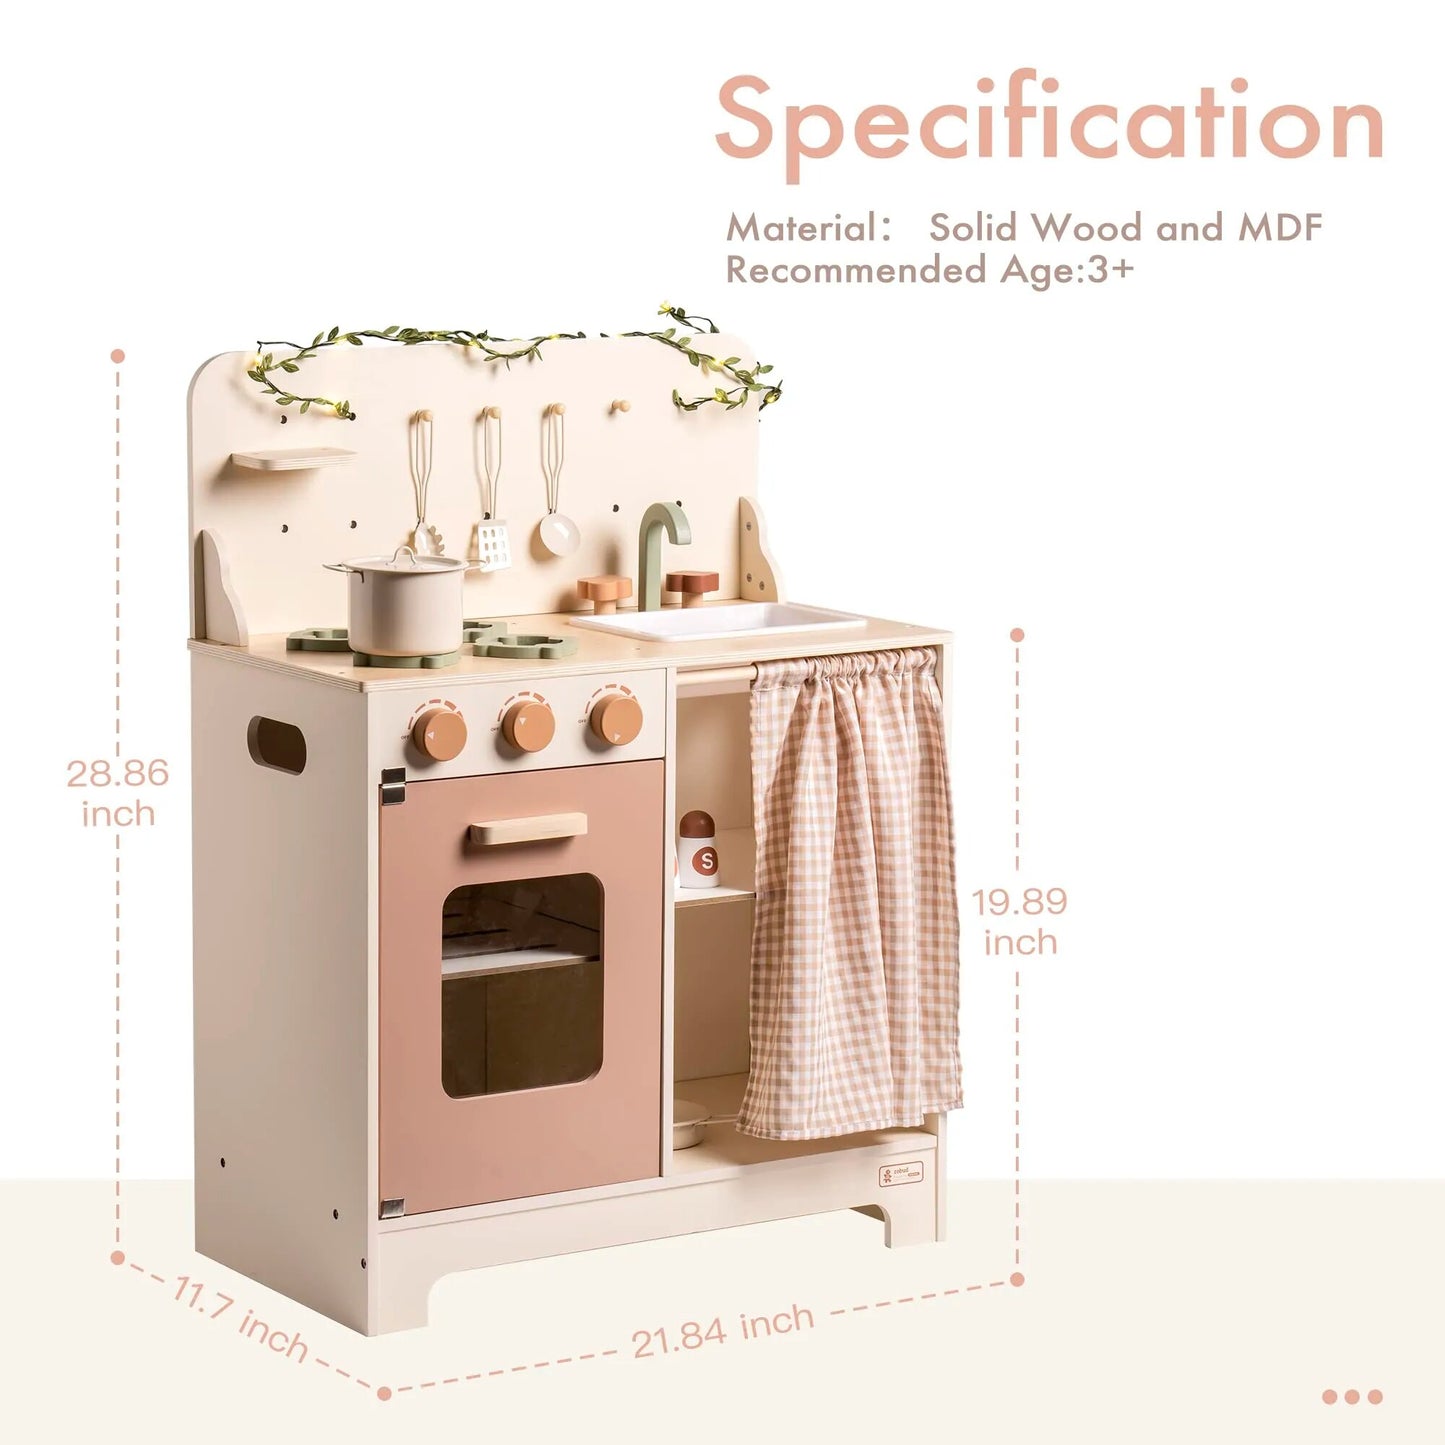 Kids Play Kitchen Set - Rustic Wooden Pretend Play Kitchen with Leaf Light String, Apron, and Groves, for Toddlers 3+  Wooden Play Kitchen - Budget Friendly